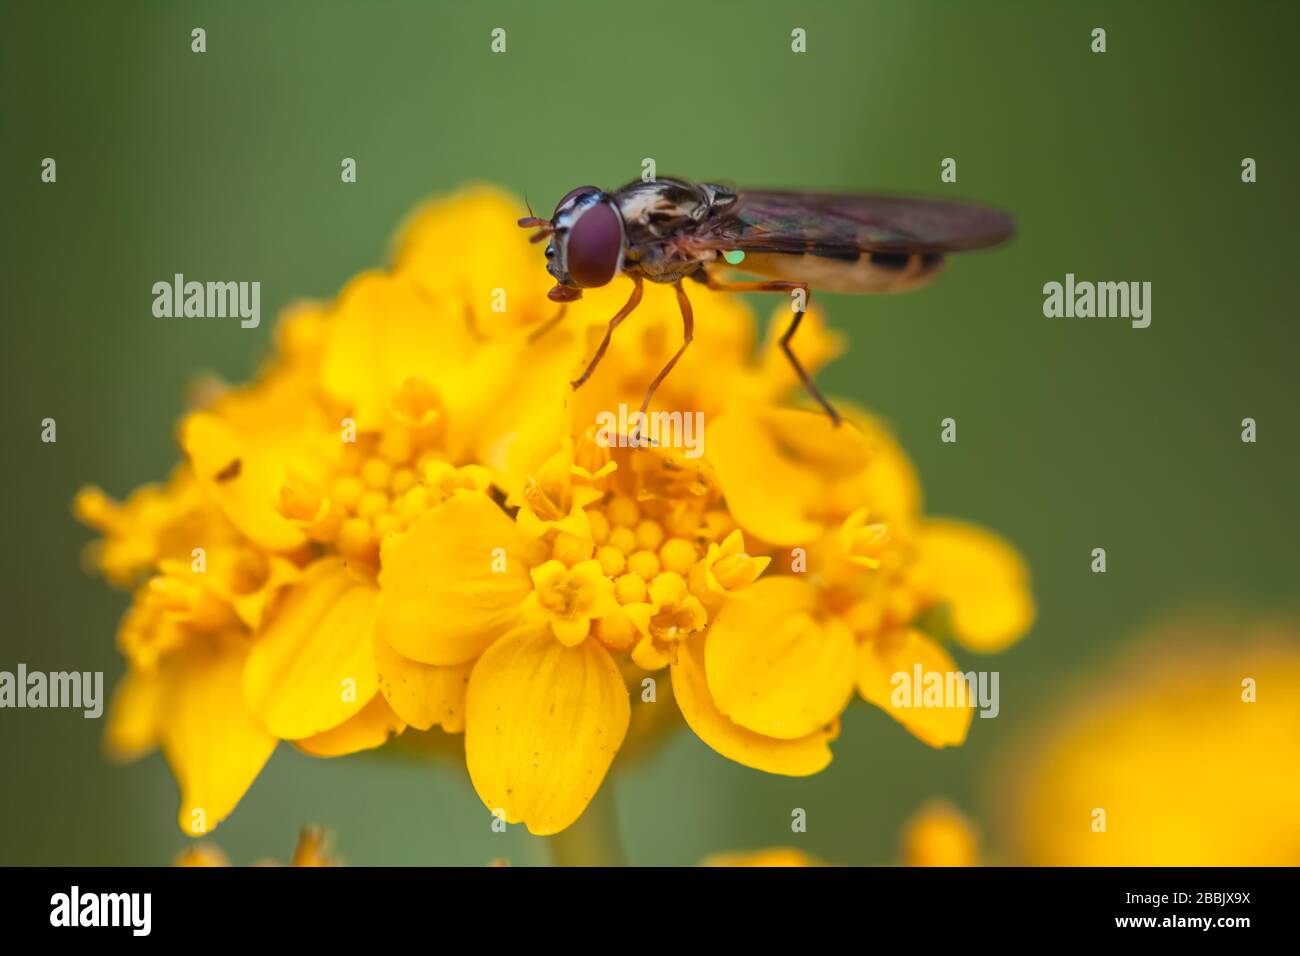 Close up at a hoverfly, family Syrphidae, on cluster of seaside wooly sunflowers, Eriophyllum staechadifolium, California, USA. Stock Photo